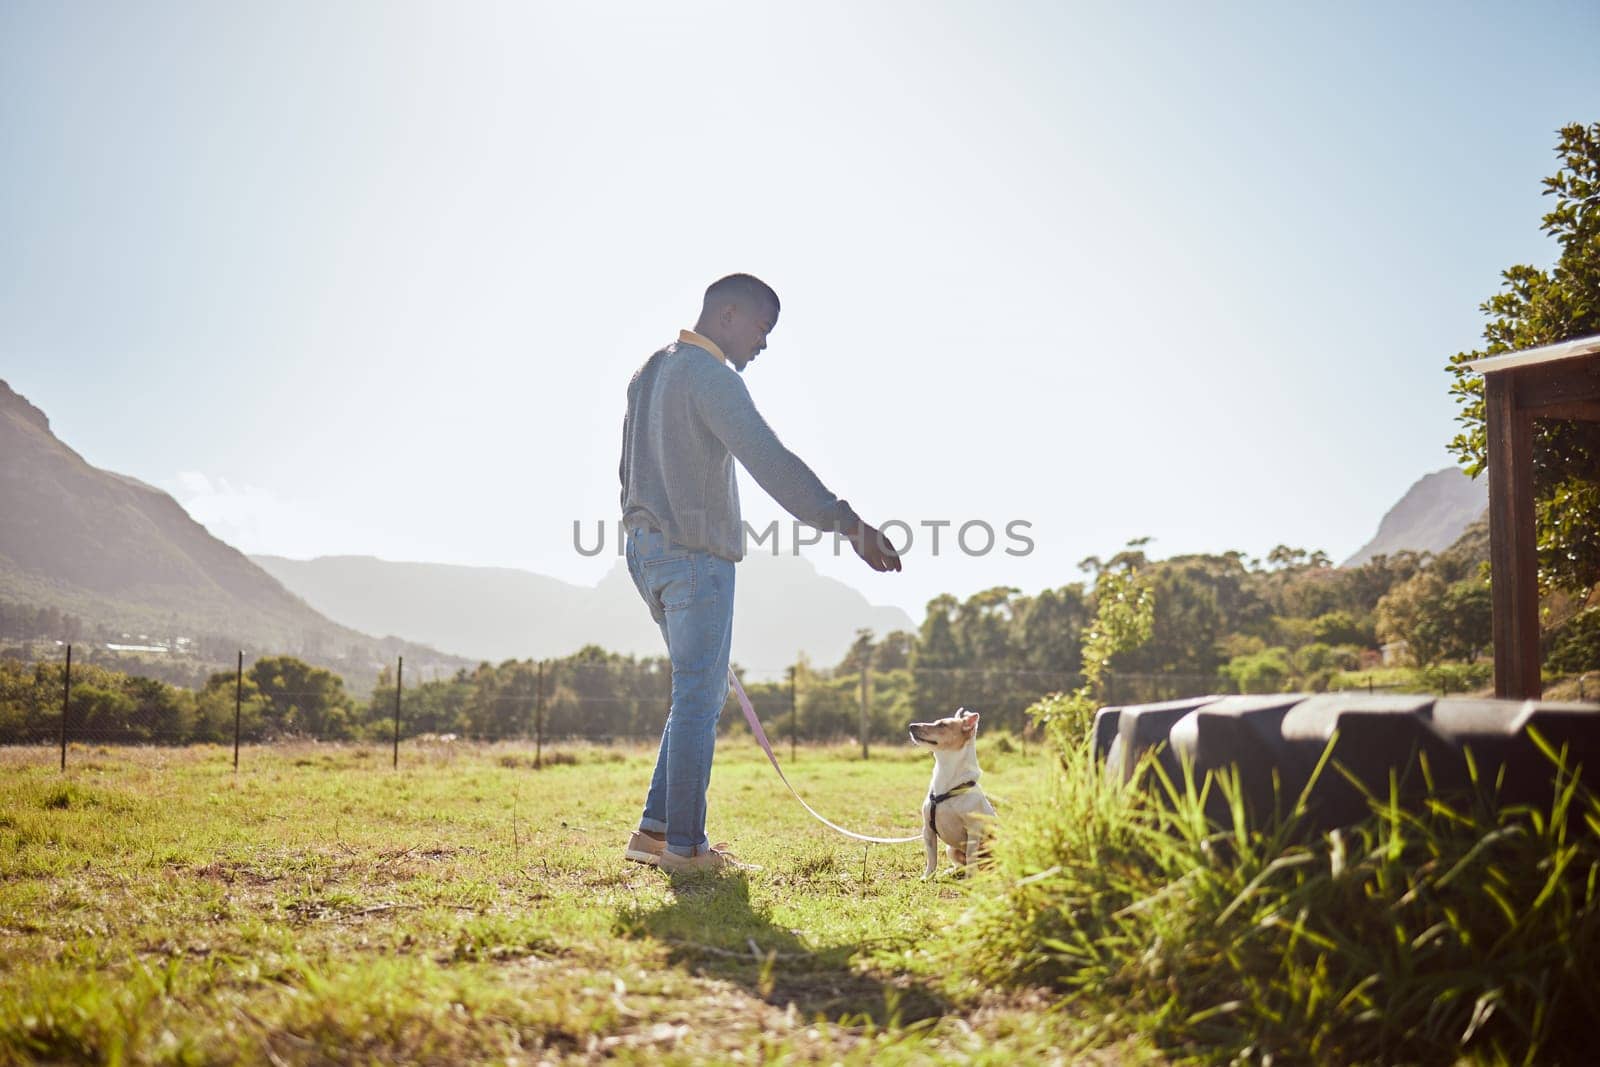 Man training dog pets at park, garden and outdoors on a leash with sky background. Black man walking a jack russell terrier puppy animal and learning trick, command or play on grass field in nature.